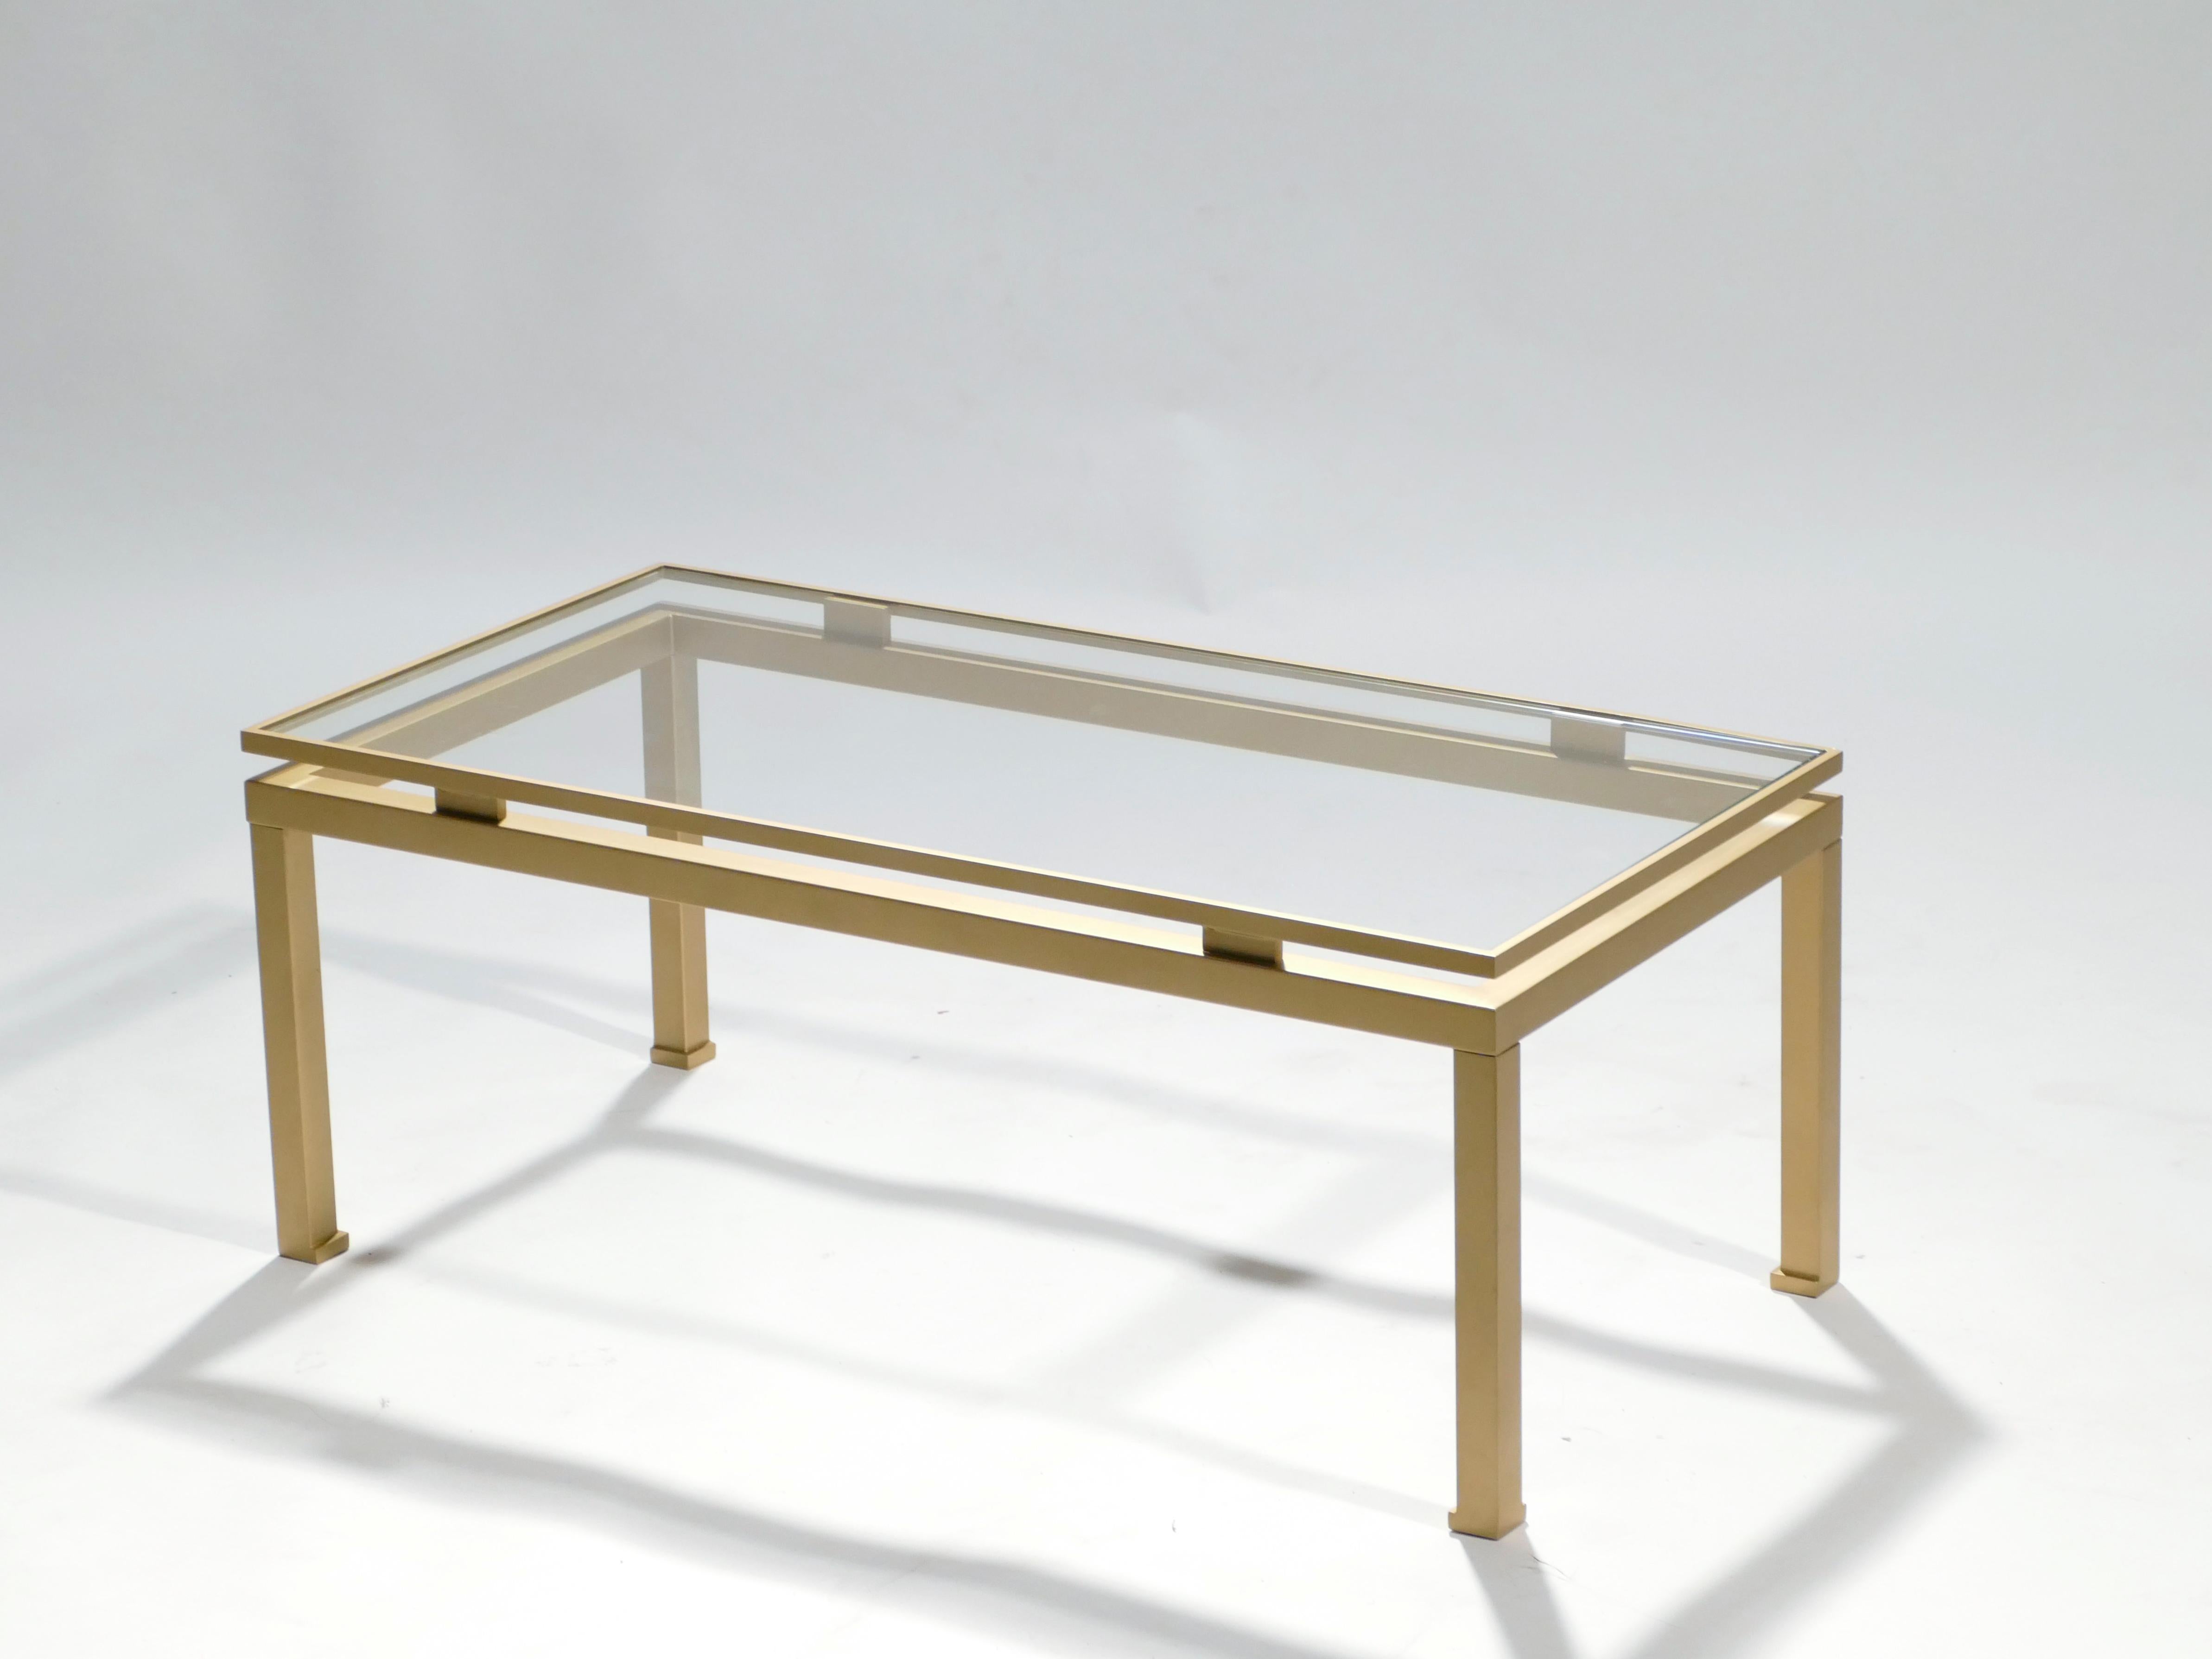 Simple lines point to this coffee table’s midcentury roots. Designed by Guy Lefevre for Maison Jansen, it features silky brass legs and a glass top. Its symmetry, elevated glass, and strong architectural design combine to create a subtle 1970s feel.